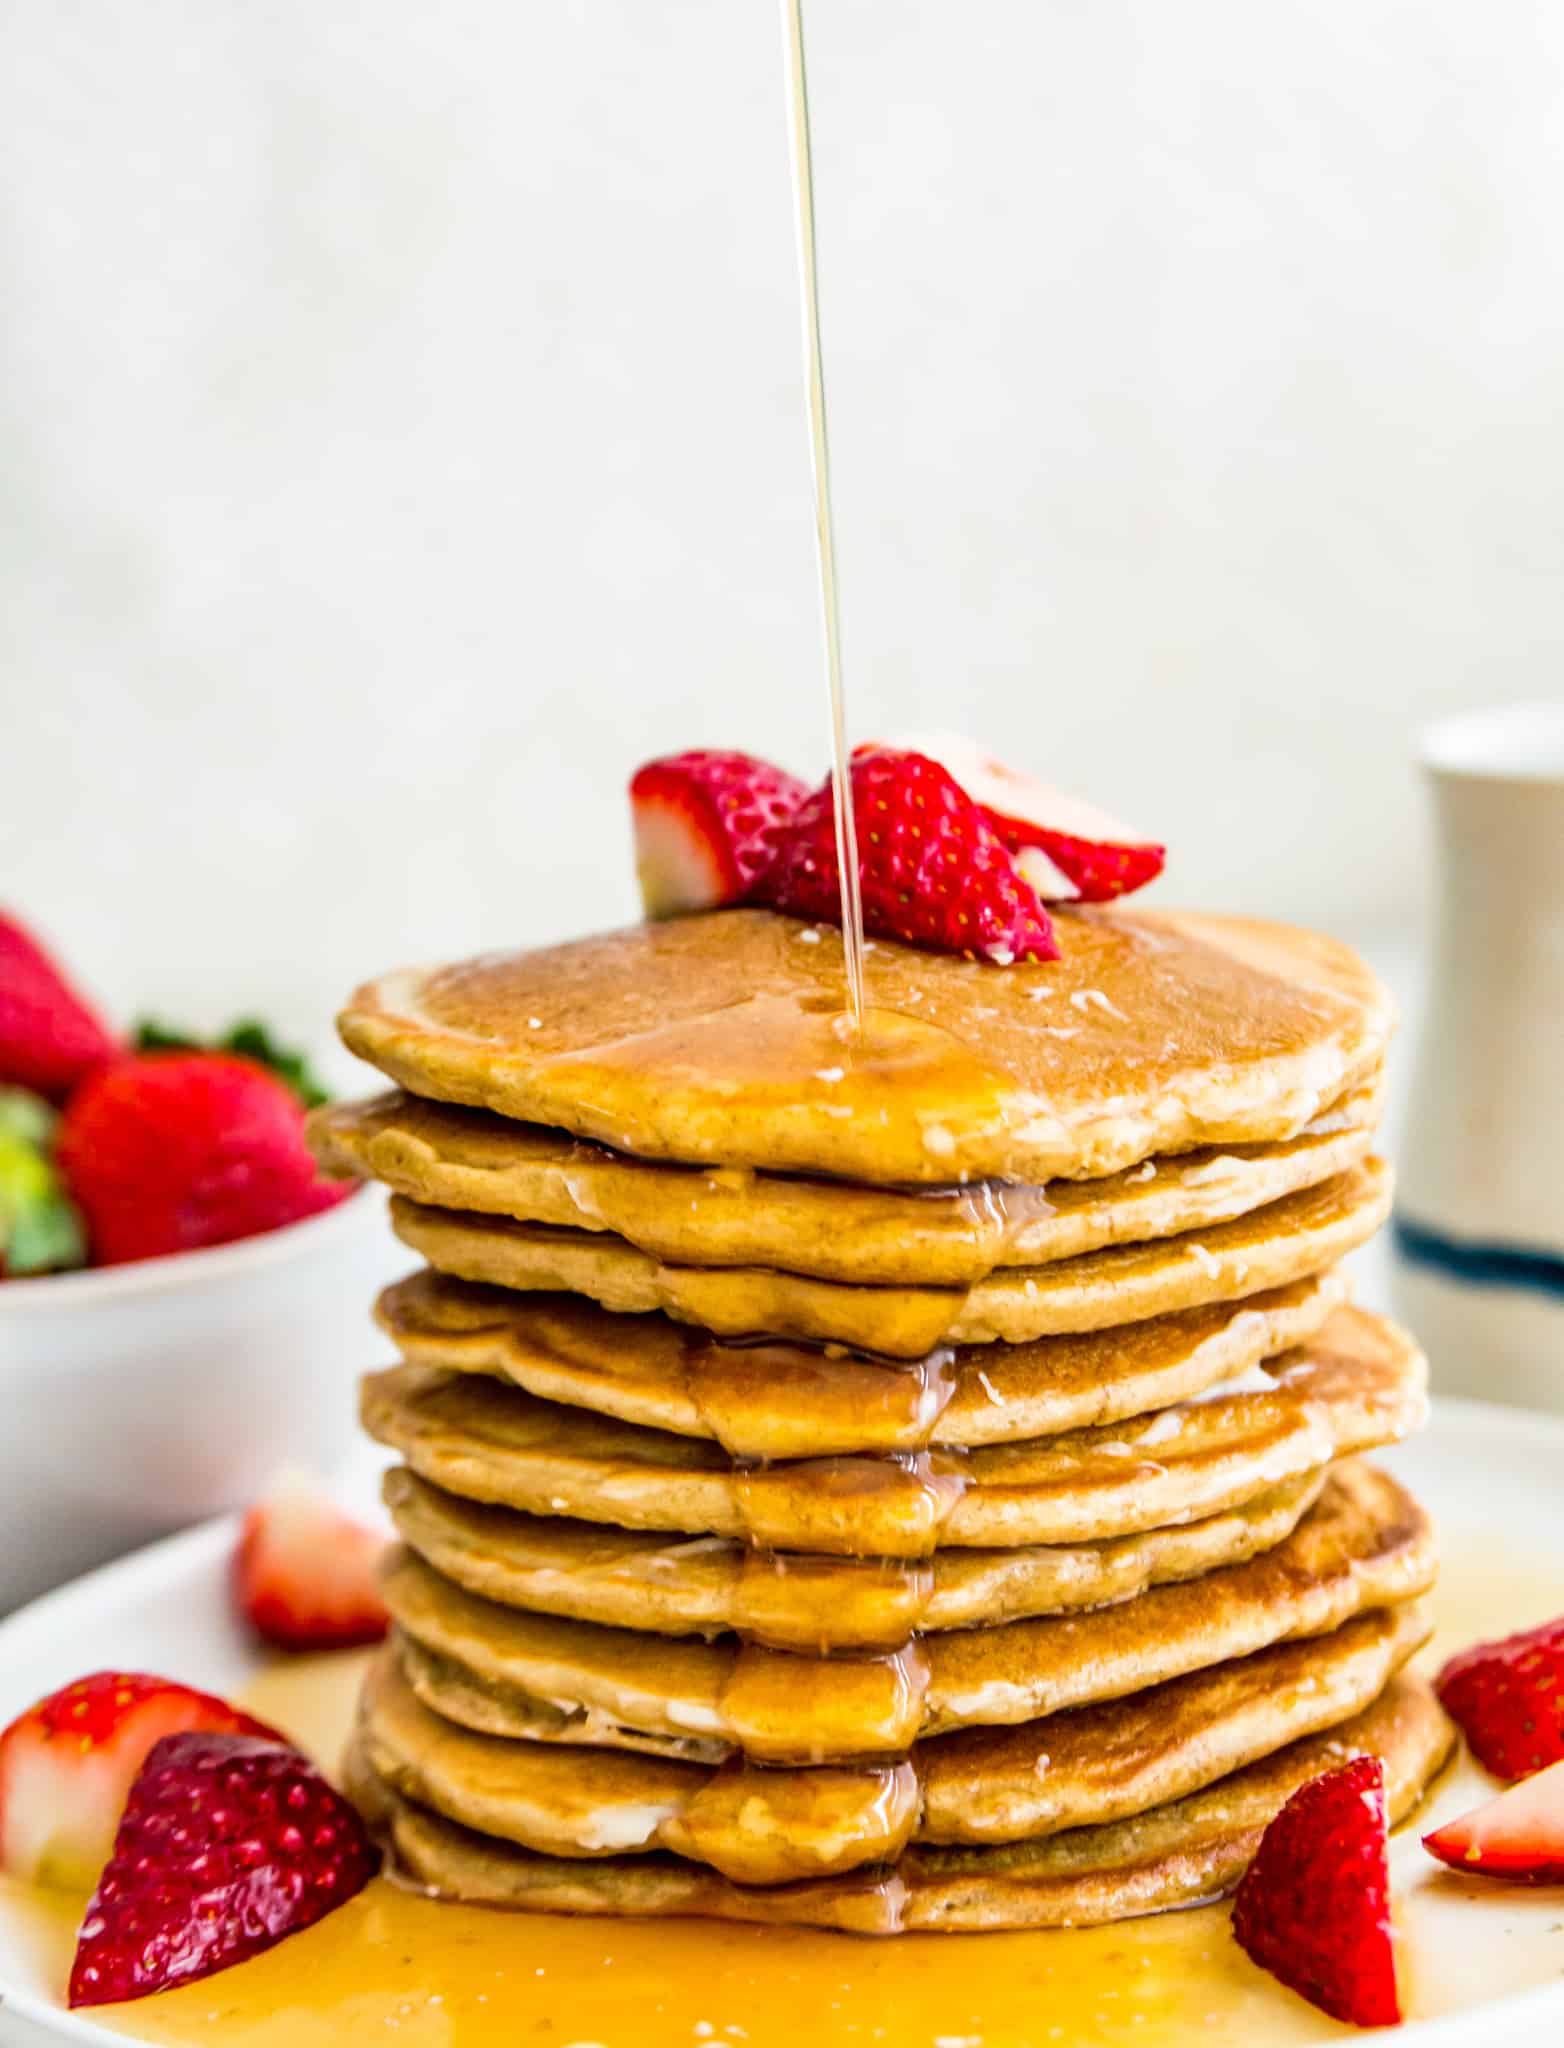 A stack of oat flour pancakes with syrup being poured on it.